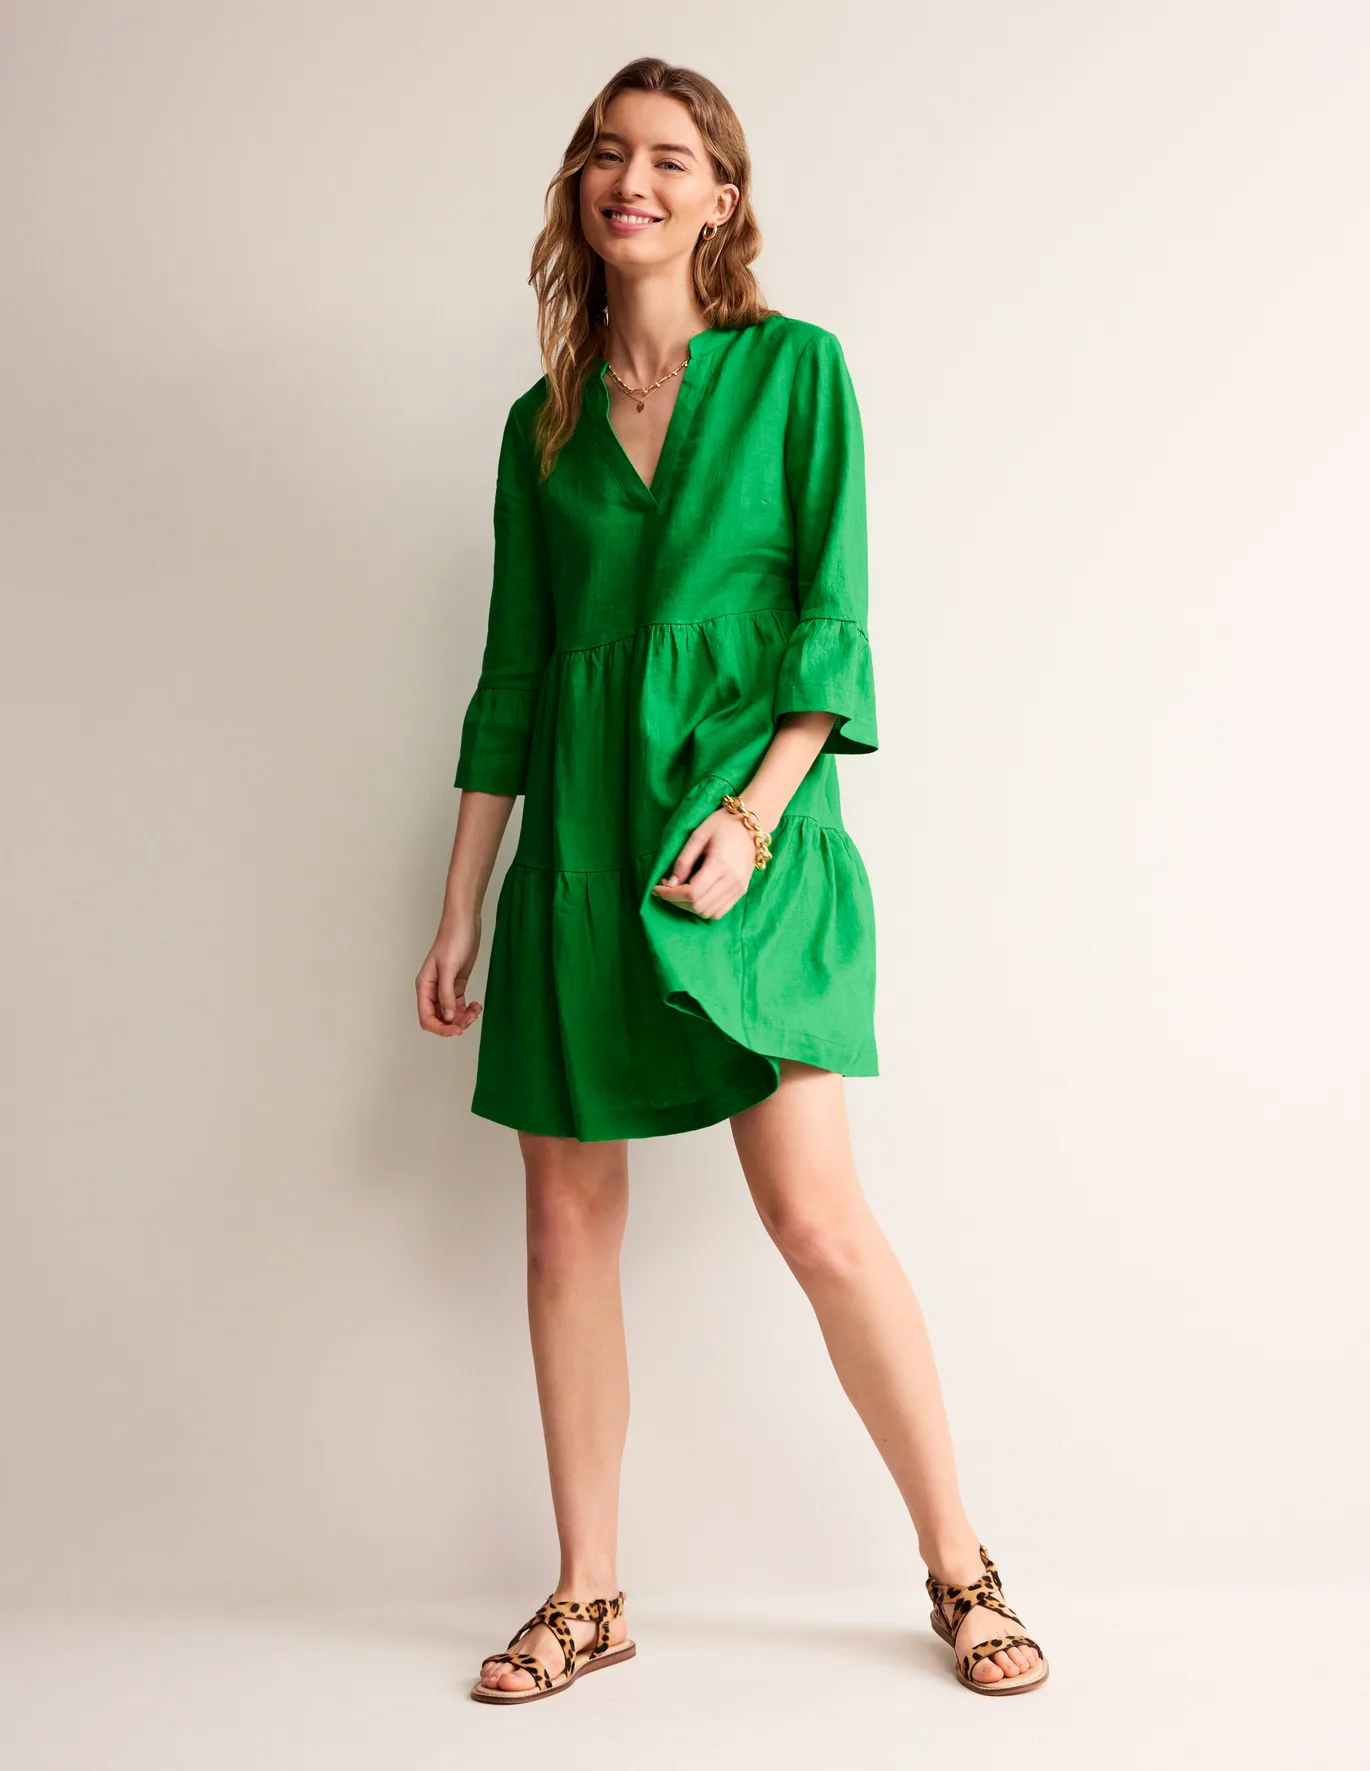 Lets explore the perfect blend of style and comfort with our guide to the best linen dresses with sleeves for summer. From casual outings to formal events, find your ideal match for every occasion. Linen Dress Sleeves | Linen Dresses With Sleeves | Linen Dress | Linen Outfit | Linen | Linen Dress Elegant | Linen Dress Beach | Linen Dress Boho | Linen Dresses Outfit | Linen Dress Styles | Linen Dress Outfits | Linen Dress Ideas | Linen Dress Outfit Ideas 